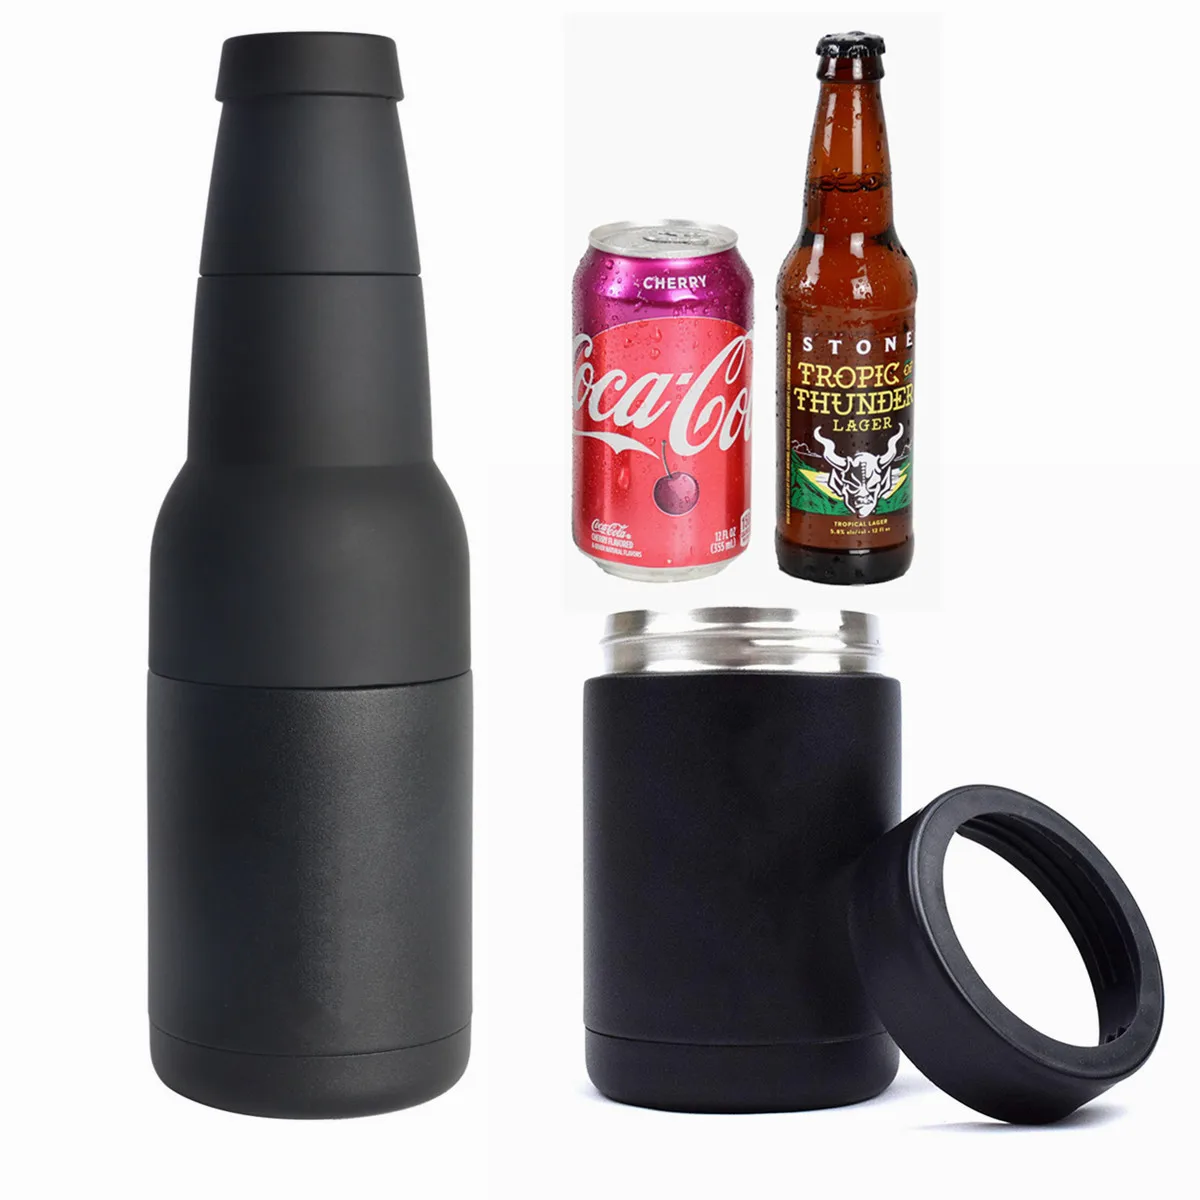 2 in 1 12 oz stainless steel vacuum insulated beverages beer bottle holder can cooler